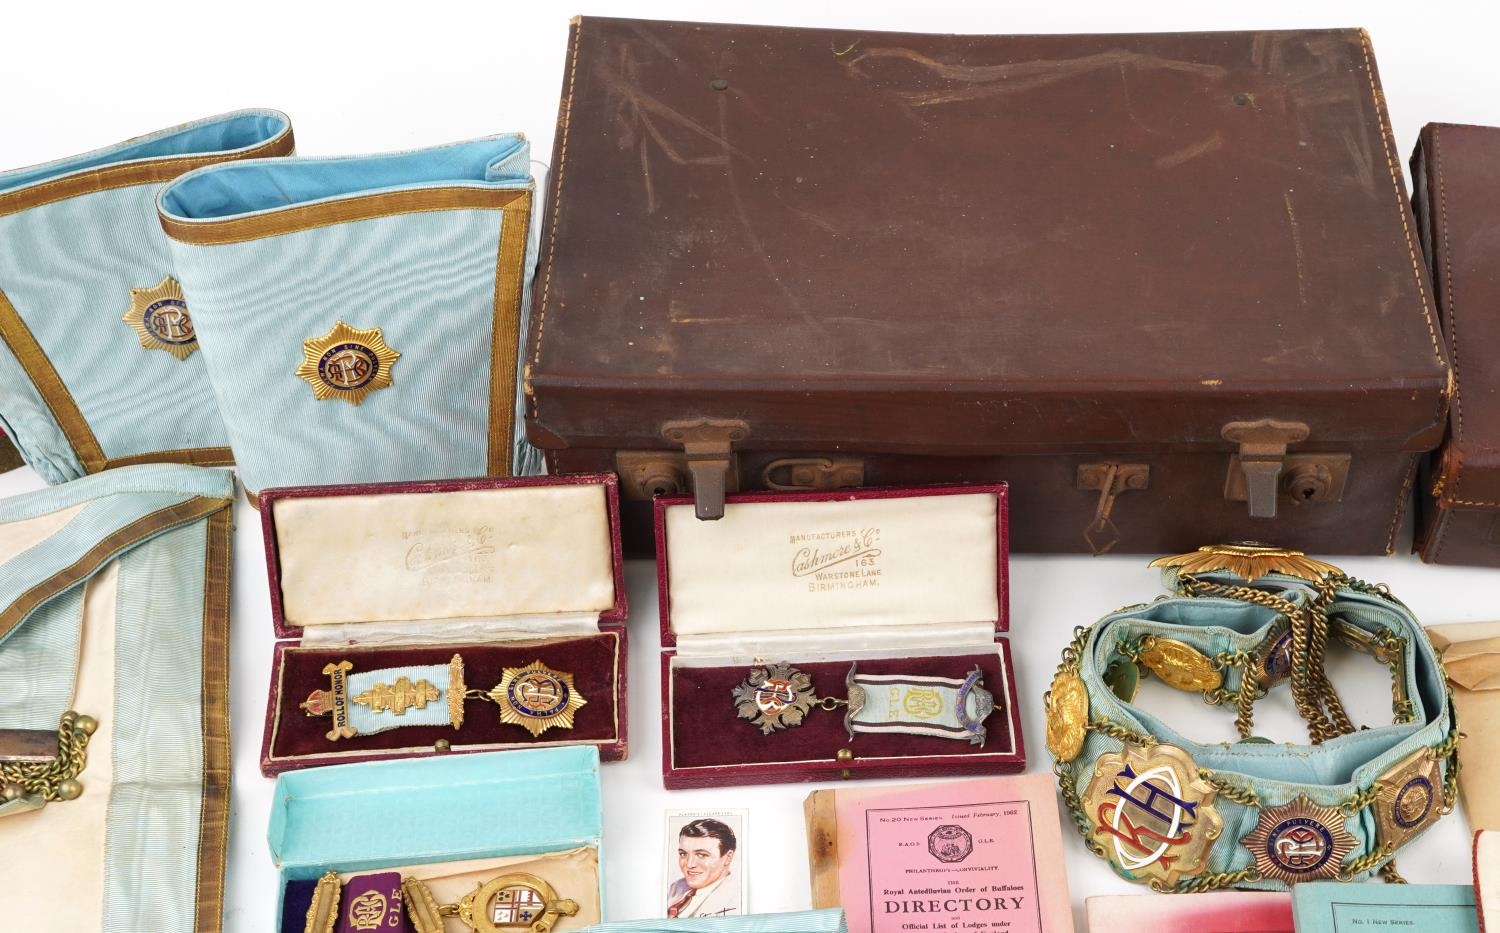 Royal Order of Buffaloes jewels and regalia relating to Brother Albert Frederick Hayes including a - Image 3 of 7